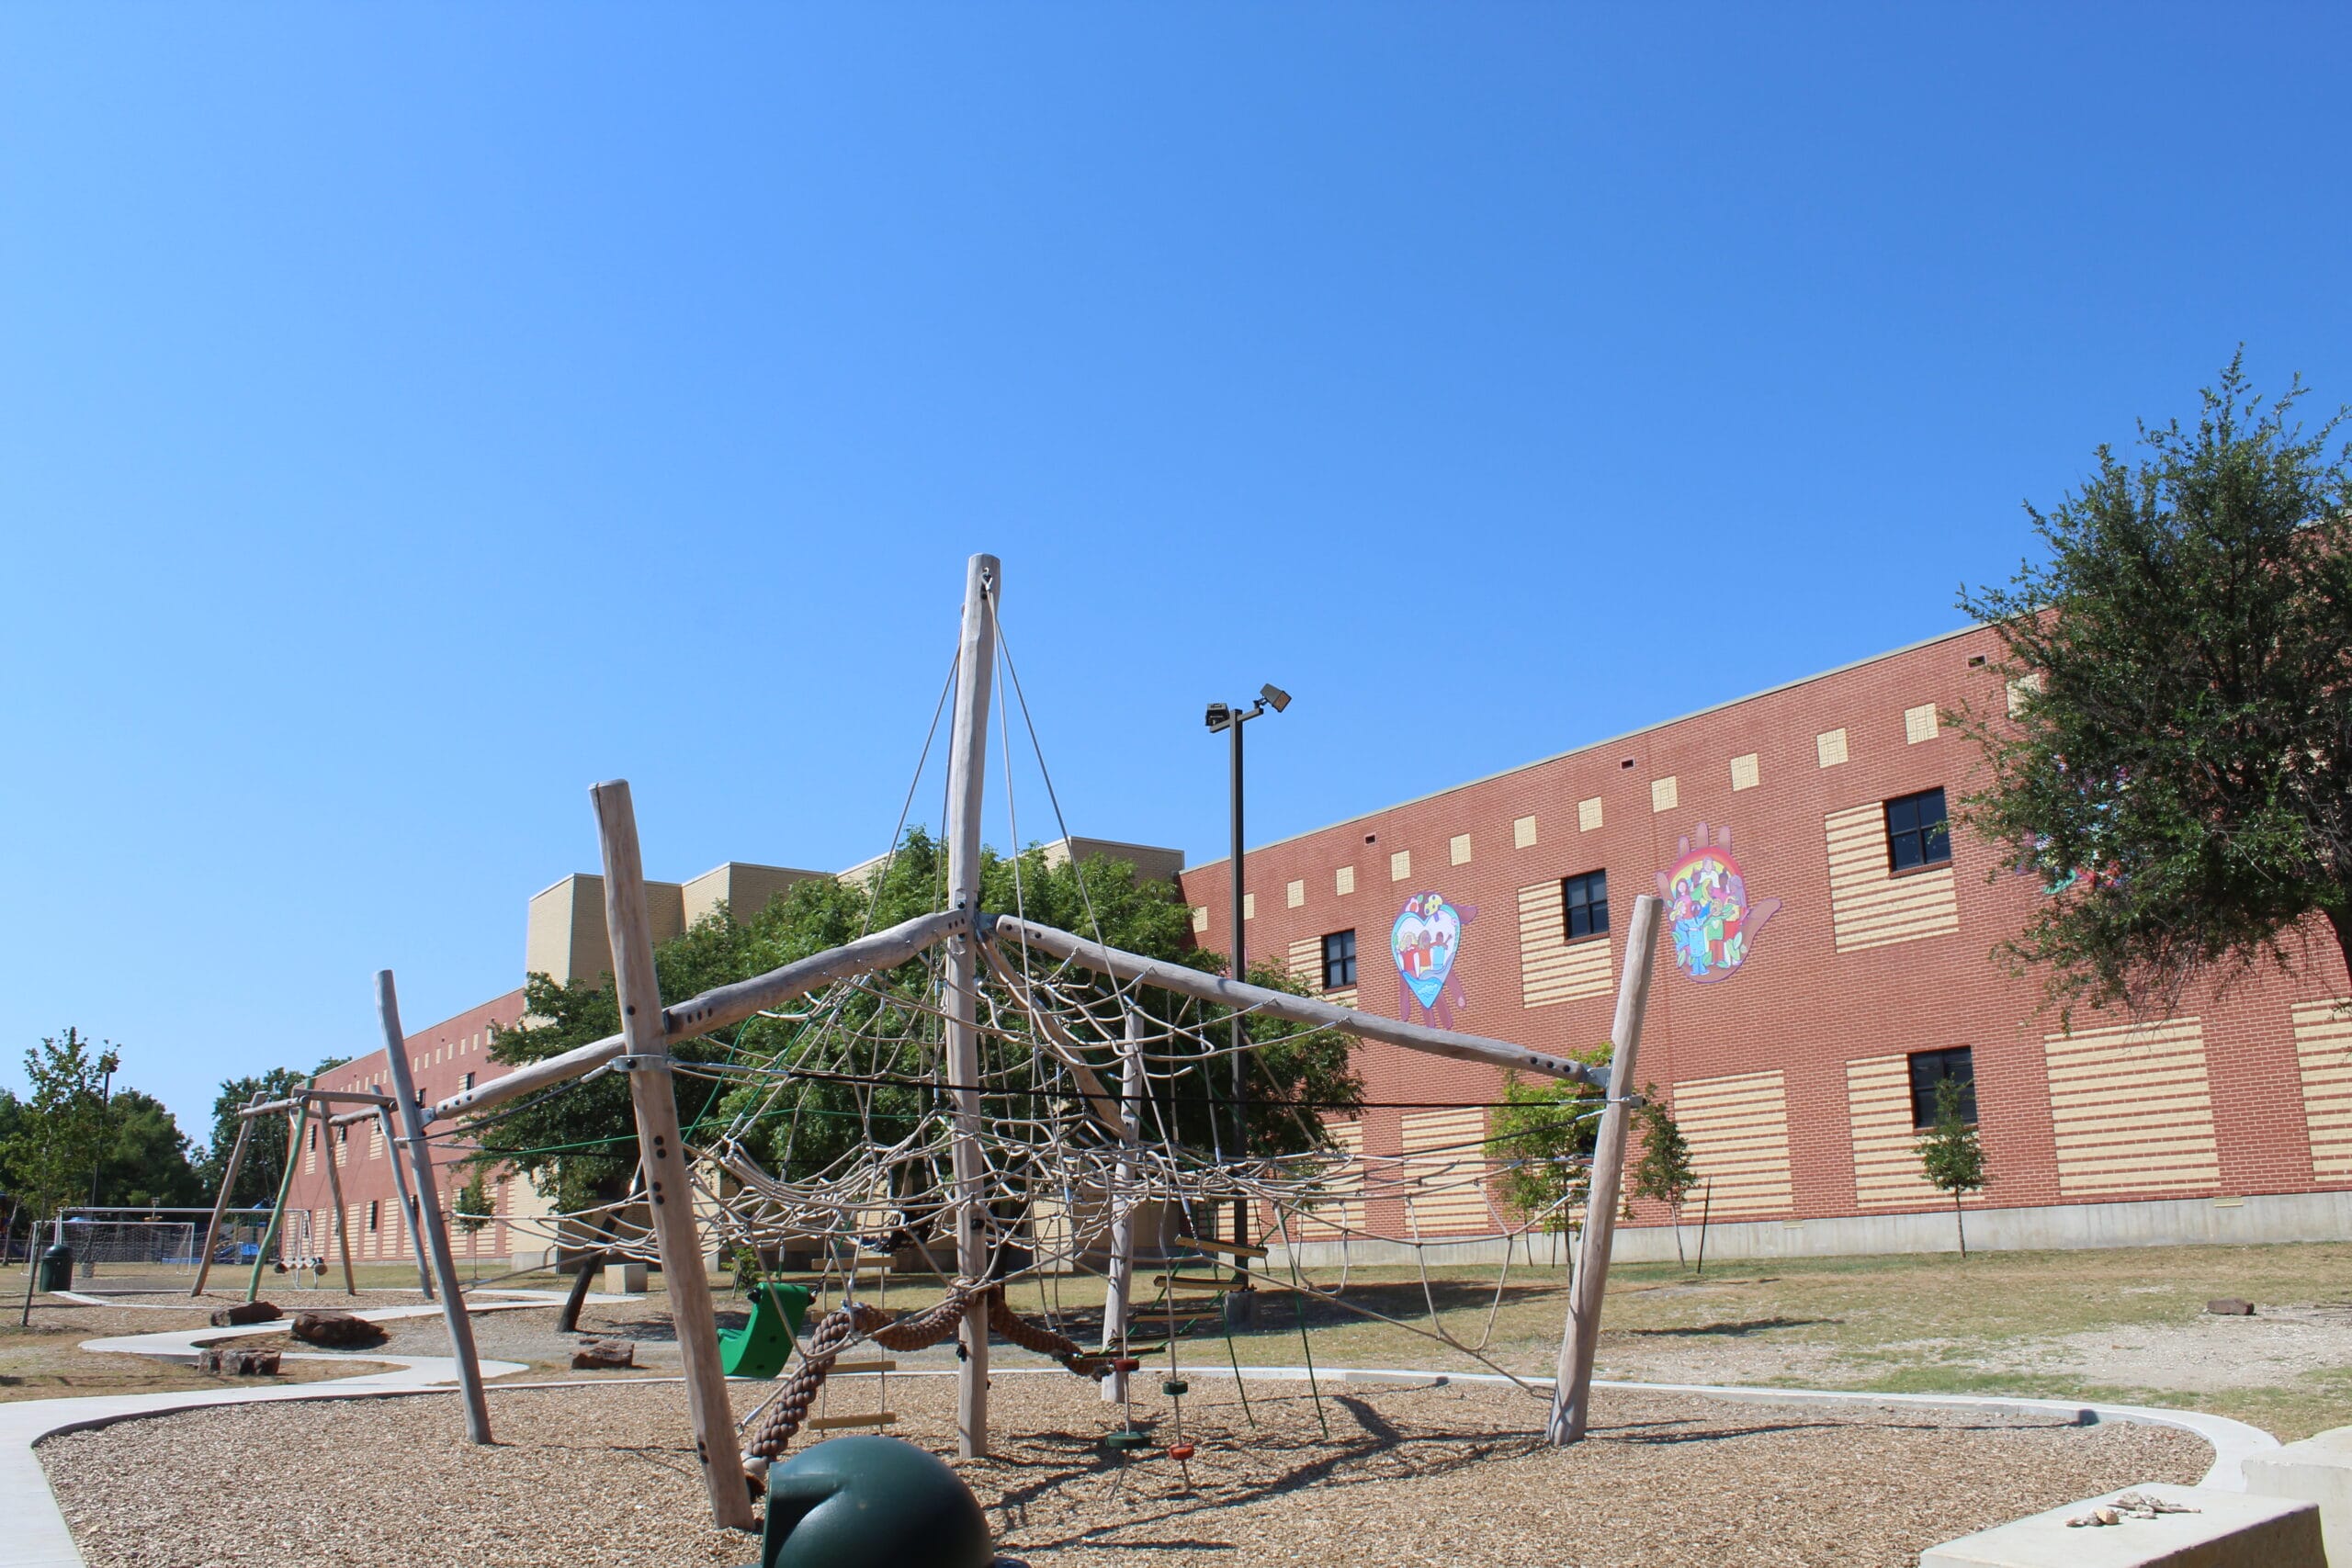 A playground with a swing set.